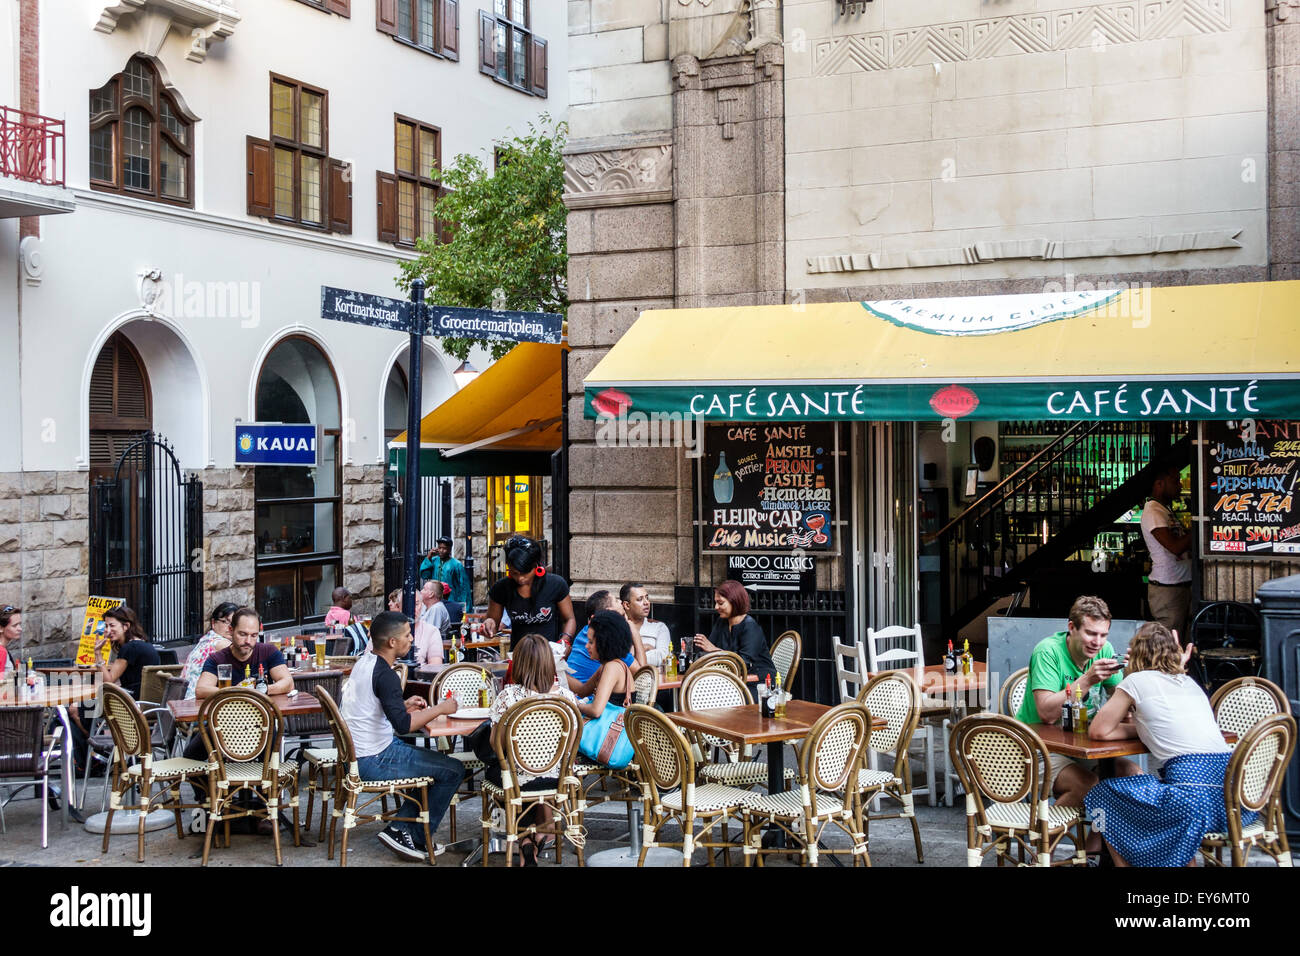 Cape Town South Africa,City Centre,center,Green Market Square,restaurant restaurants food dining cafe cafes,al fresco sidewalk outside tables,tables,C Stock Photo